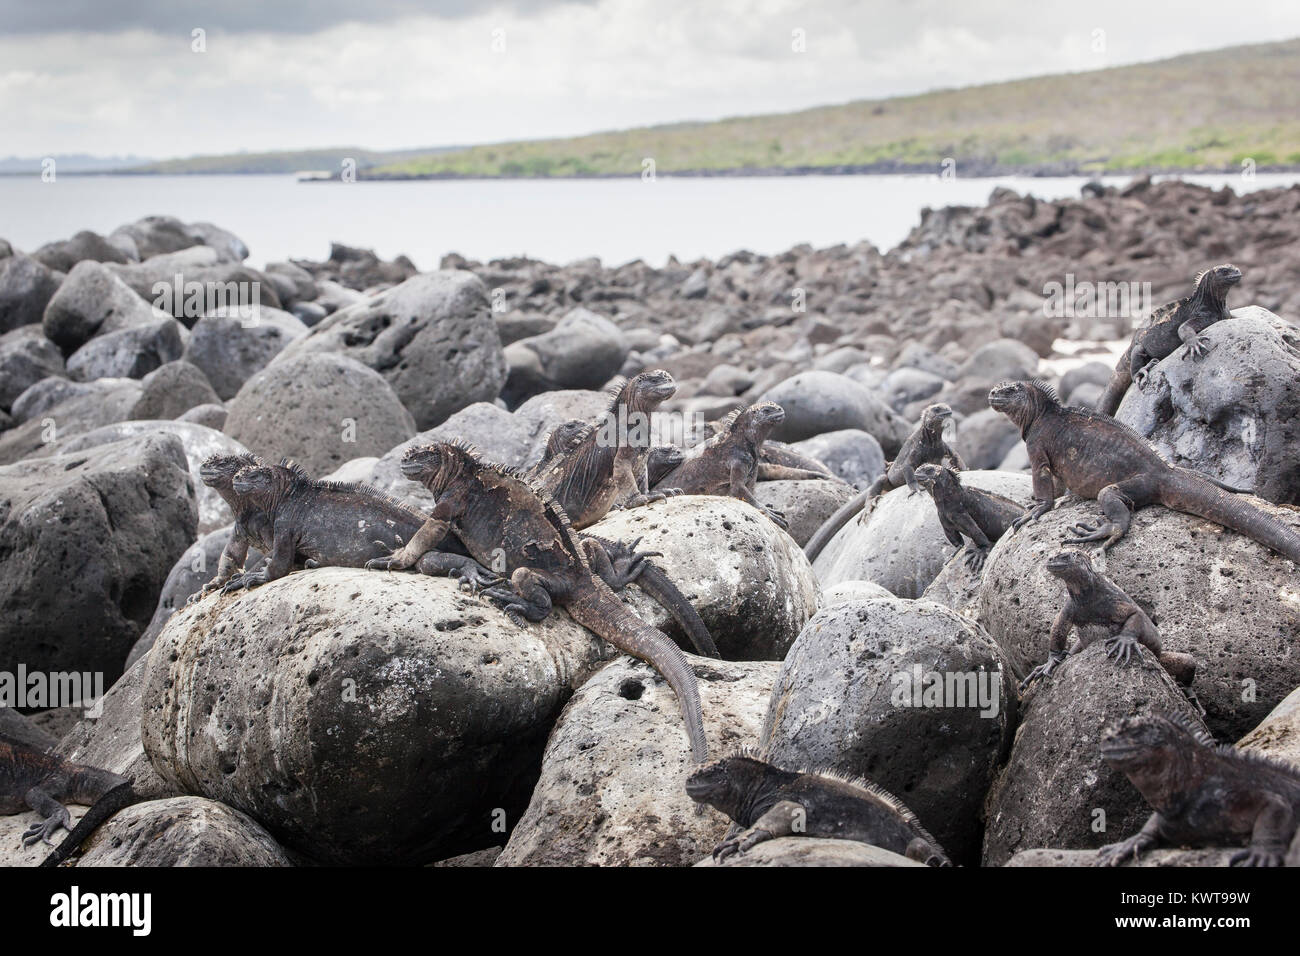 A group of marine iguanas bask on basalt boulders at the ocean's edge. Stock Photo